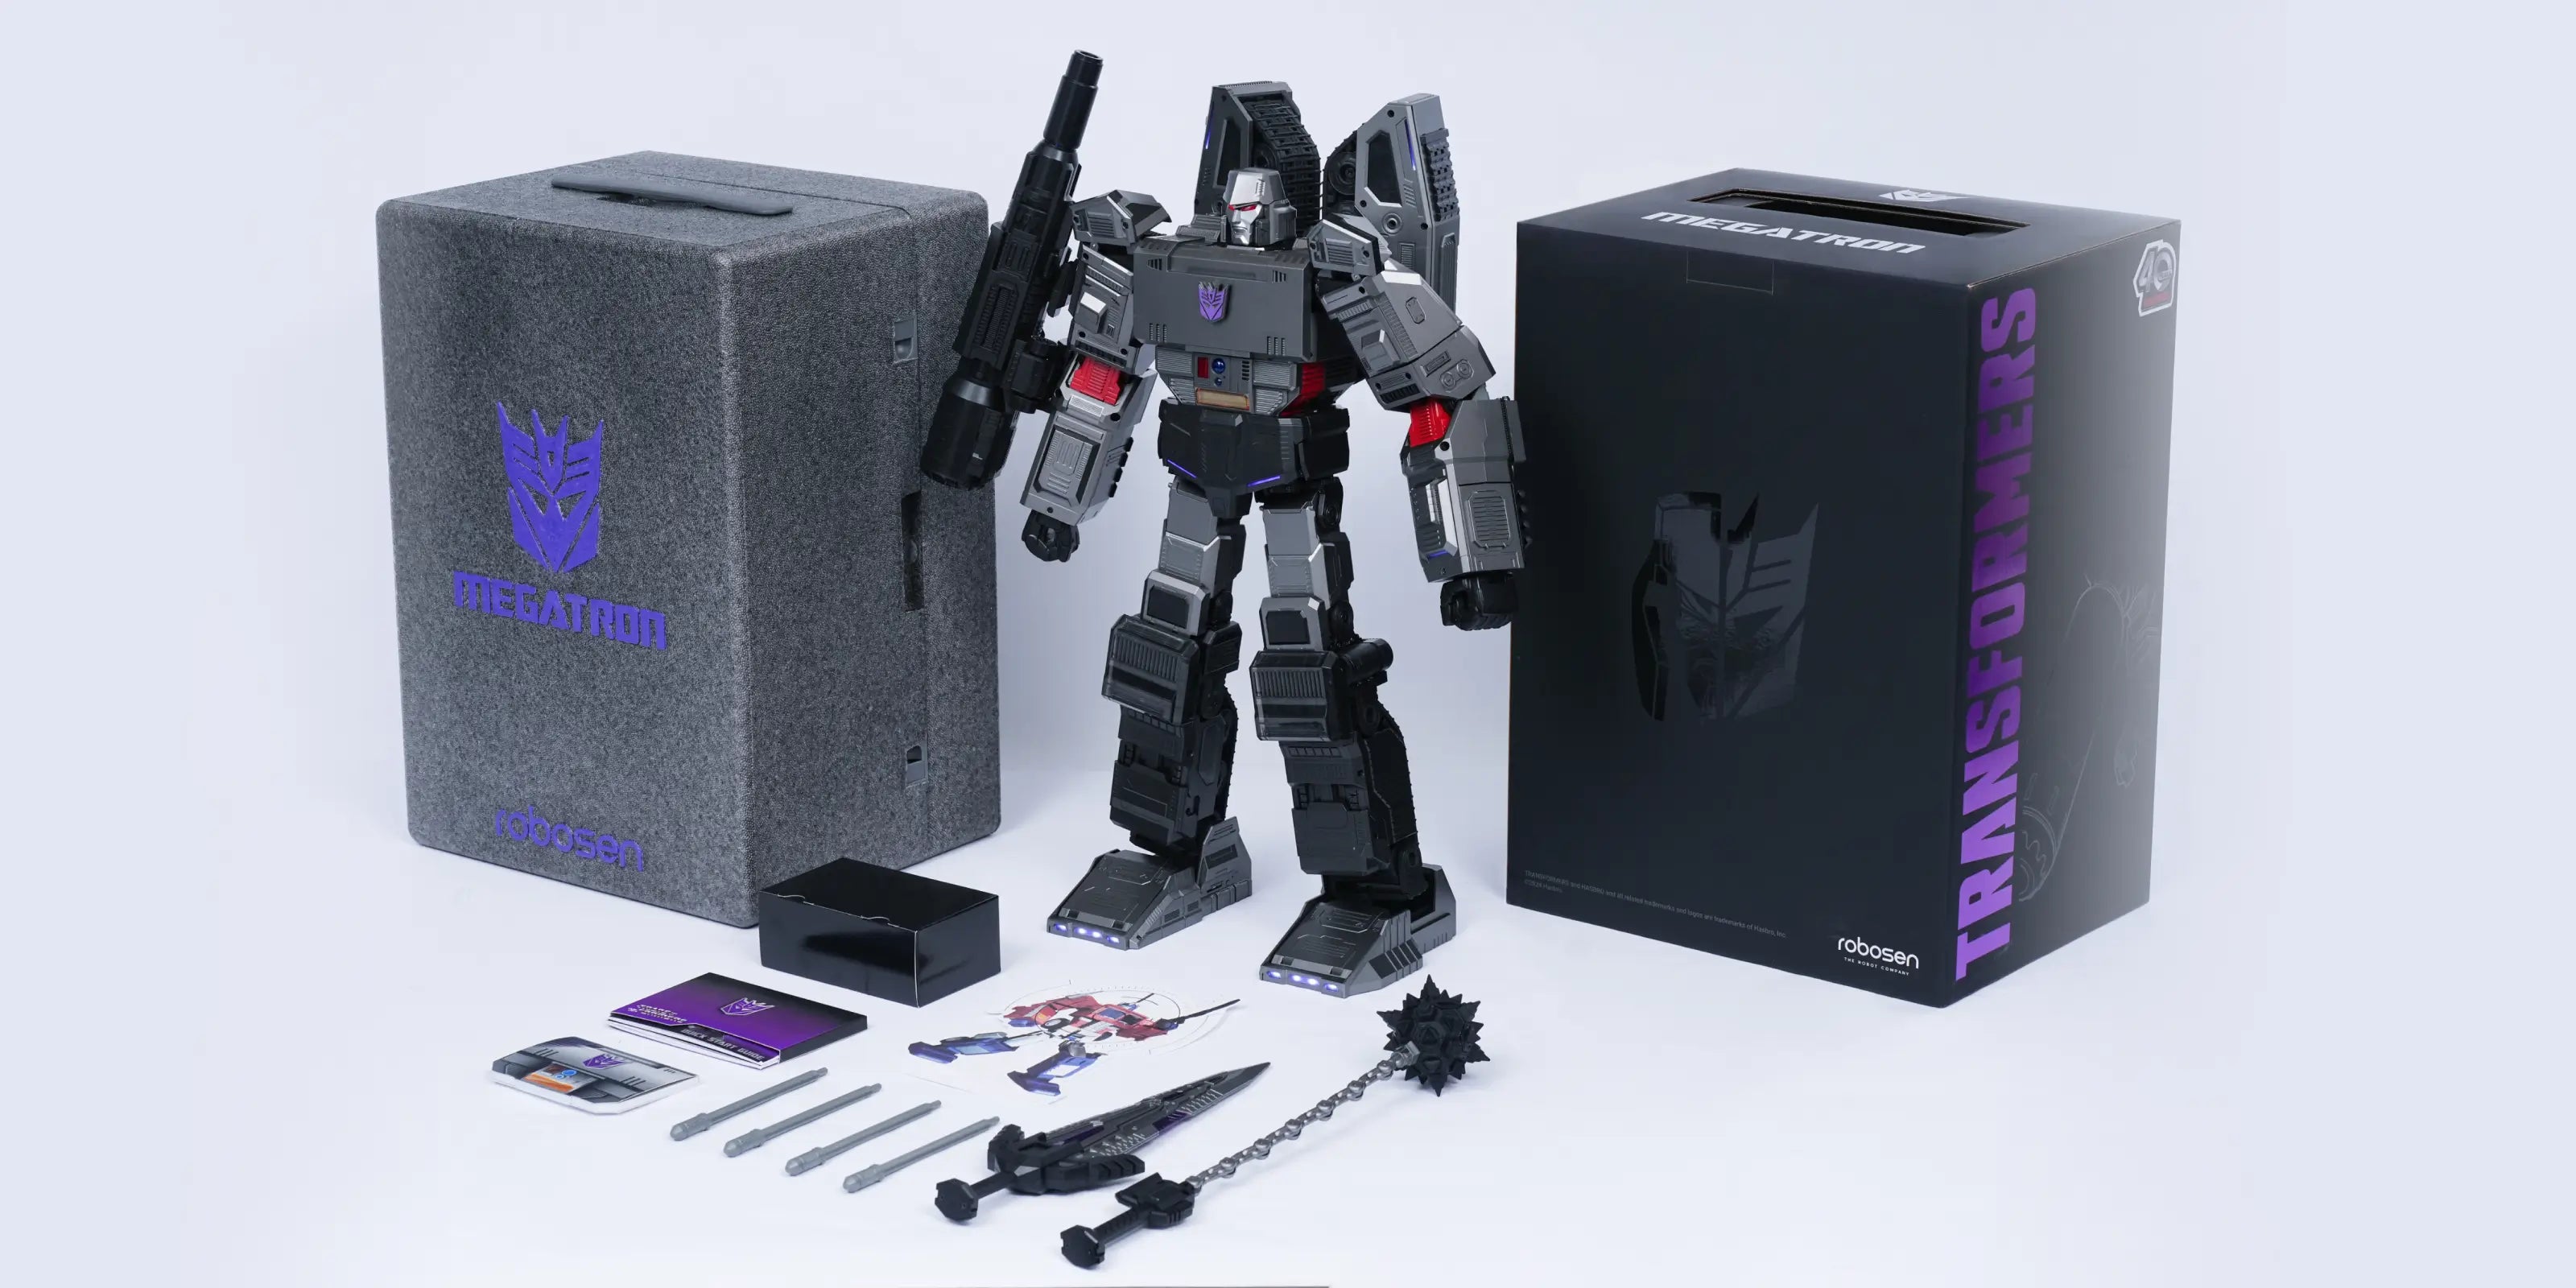 megatron_whats_in_the_box_pc